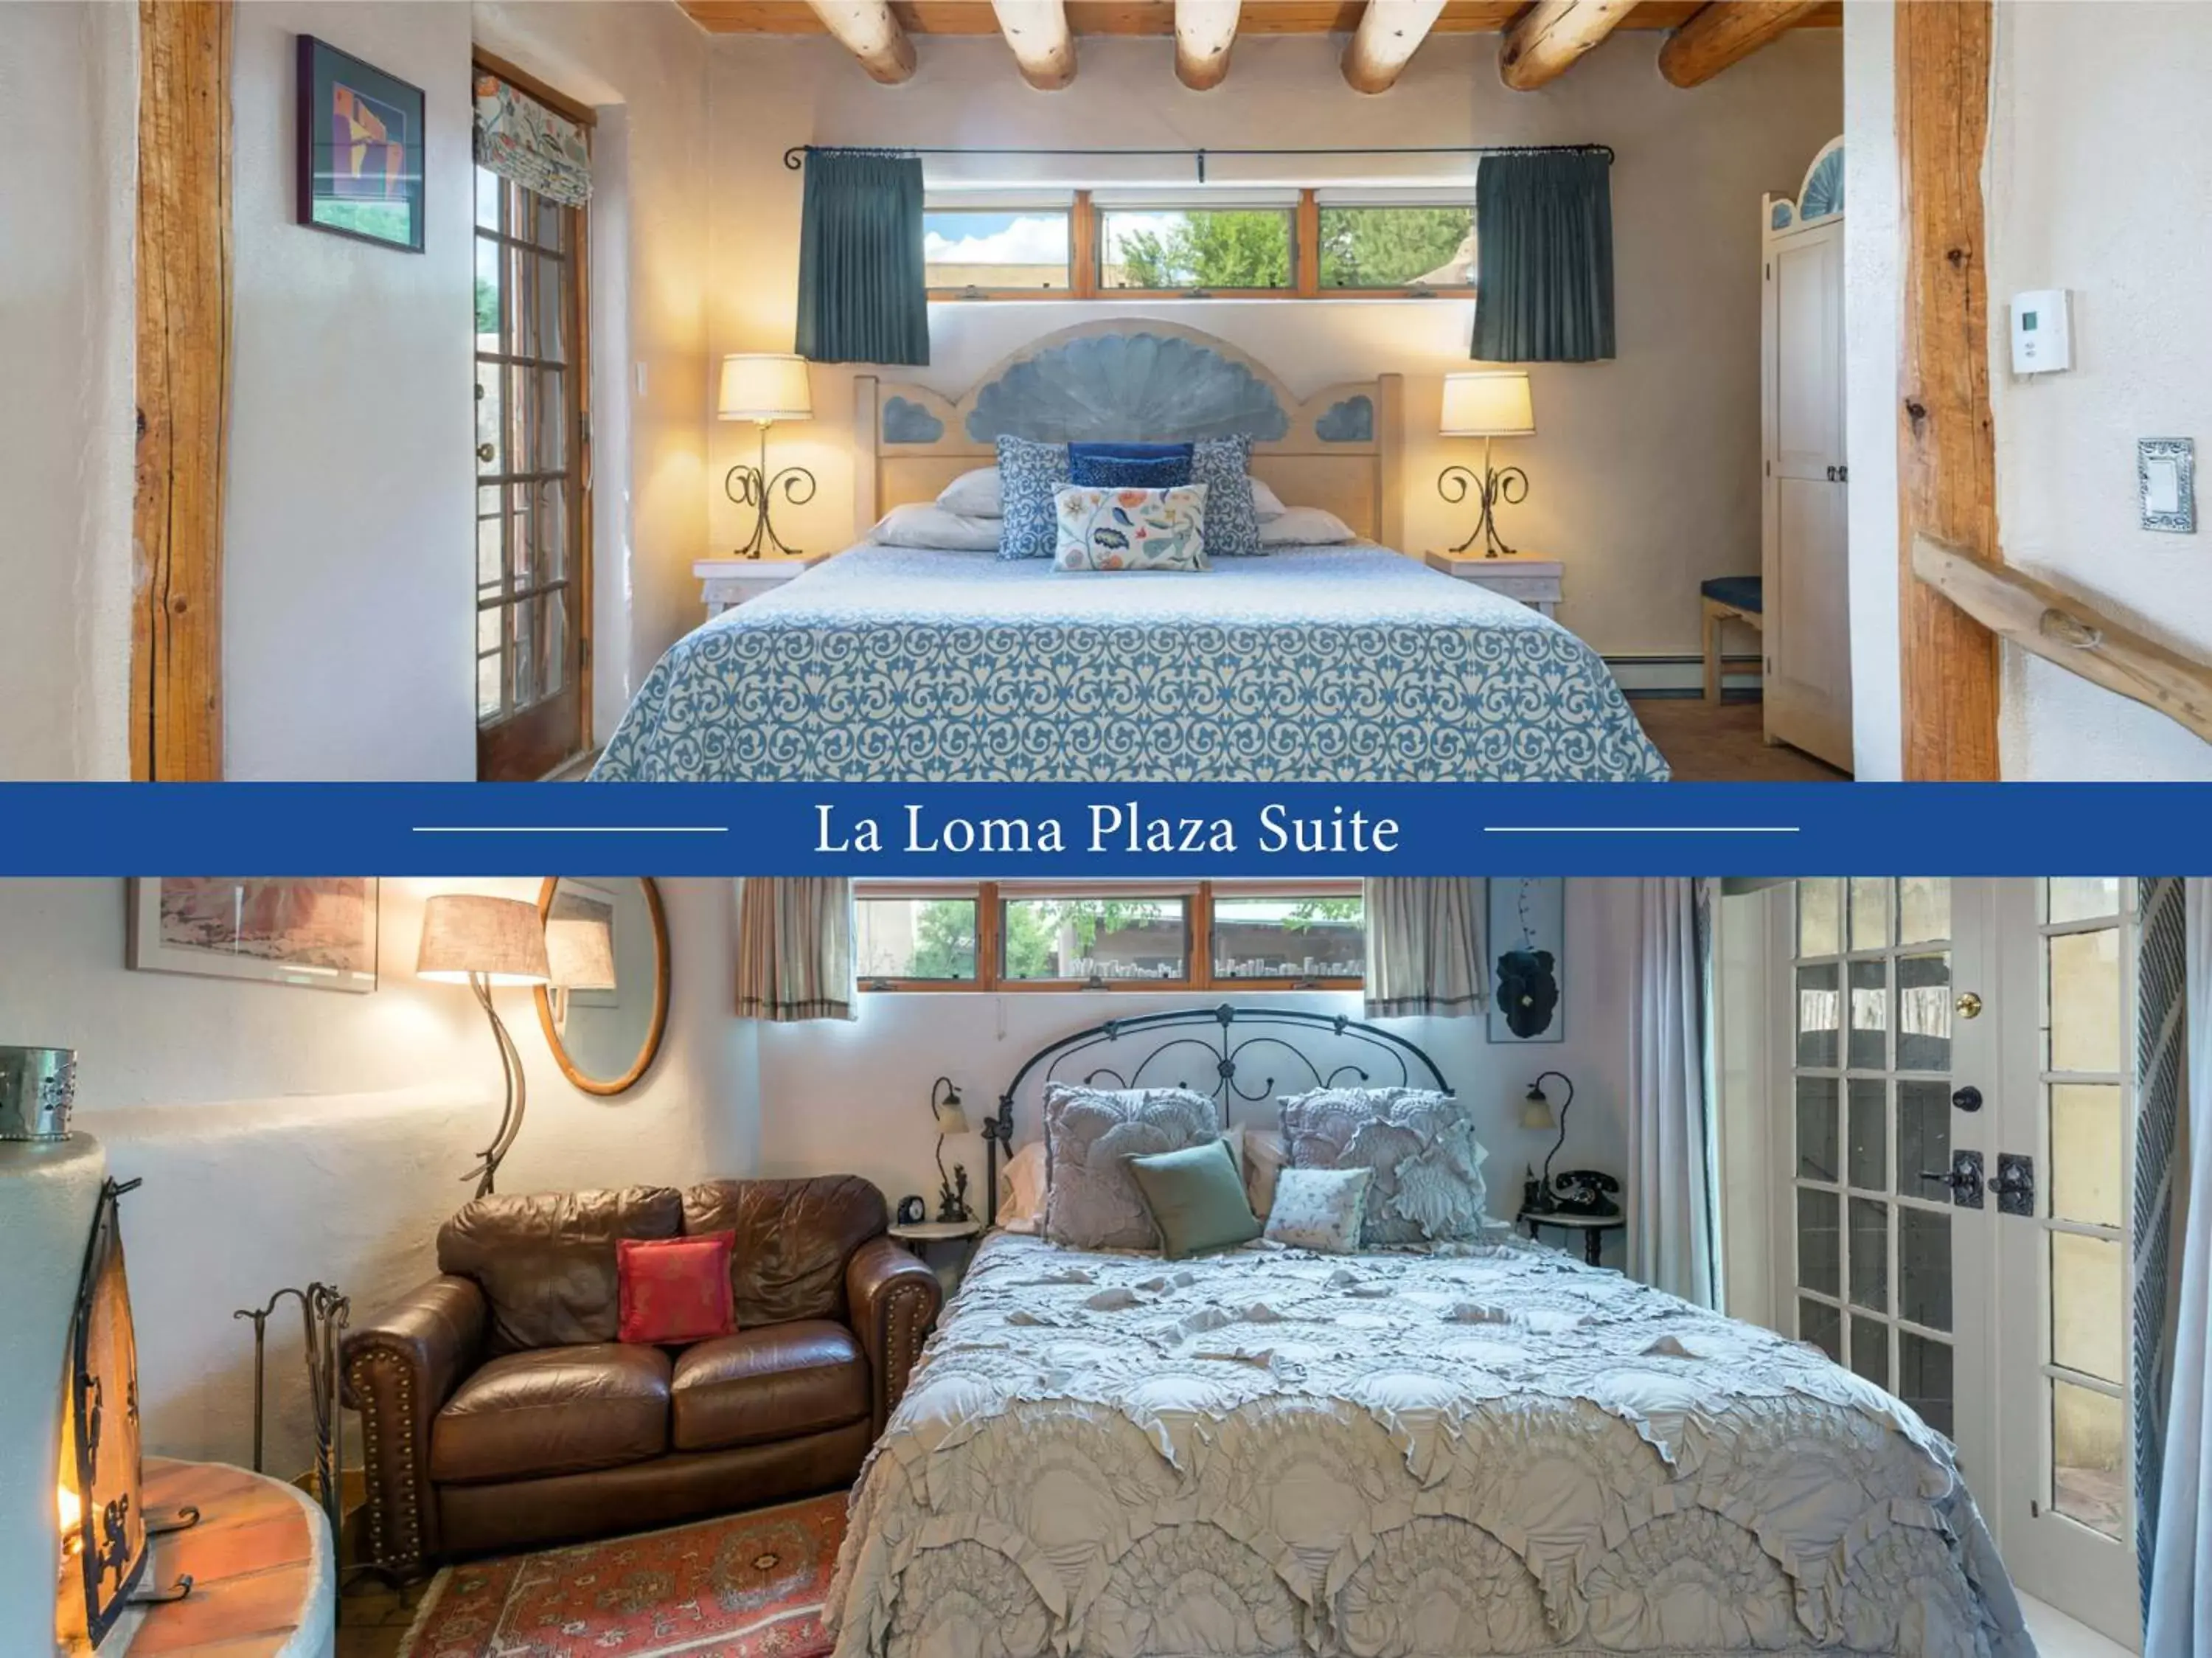 Two-Bedroom Suite in Inn on La Loma Plaza